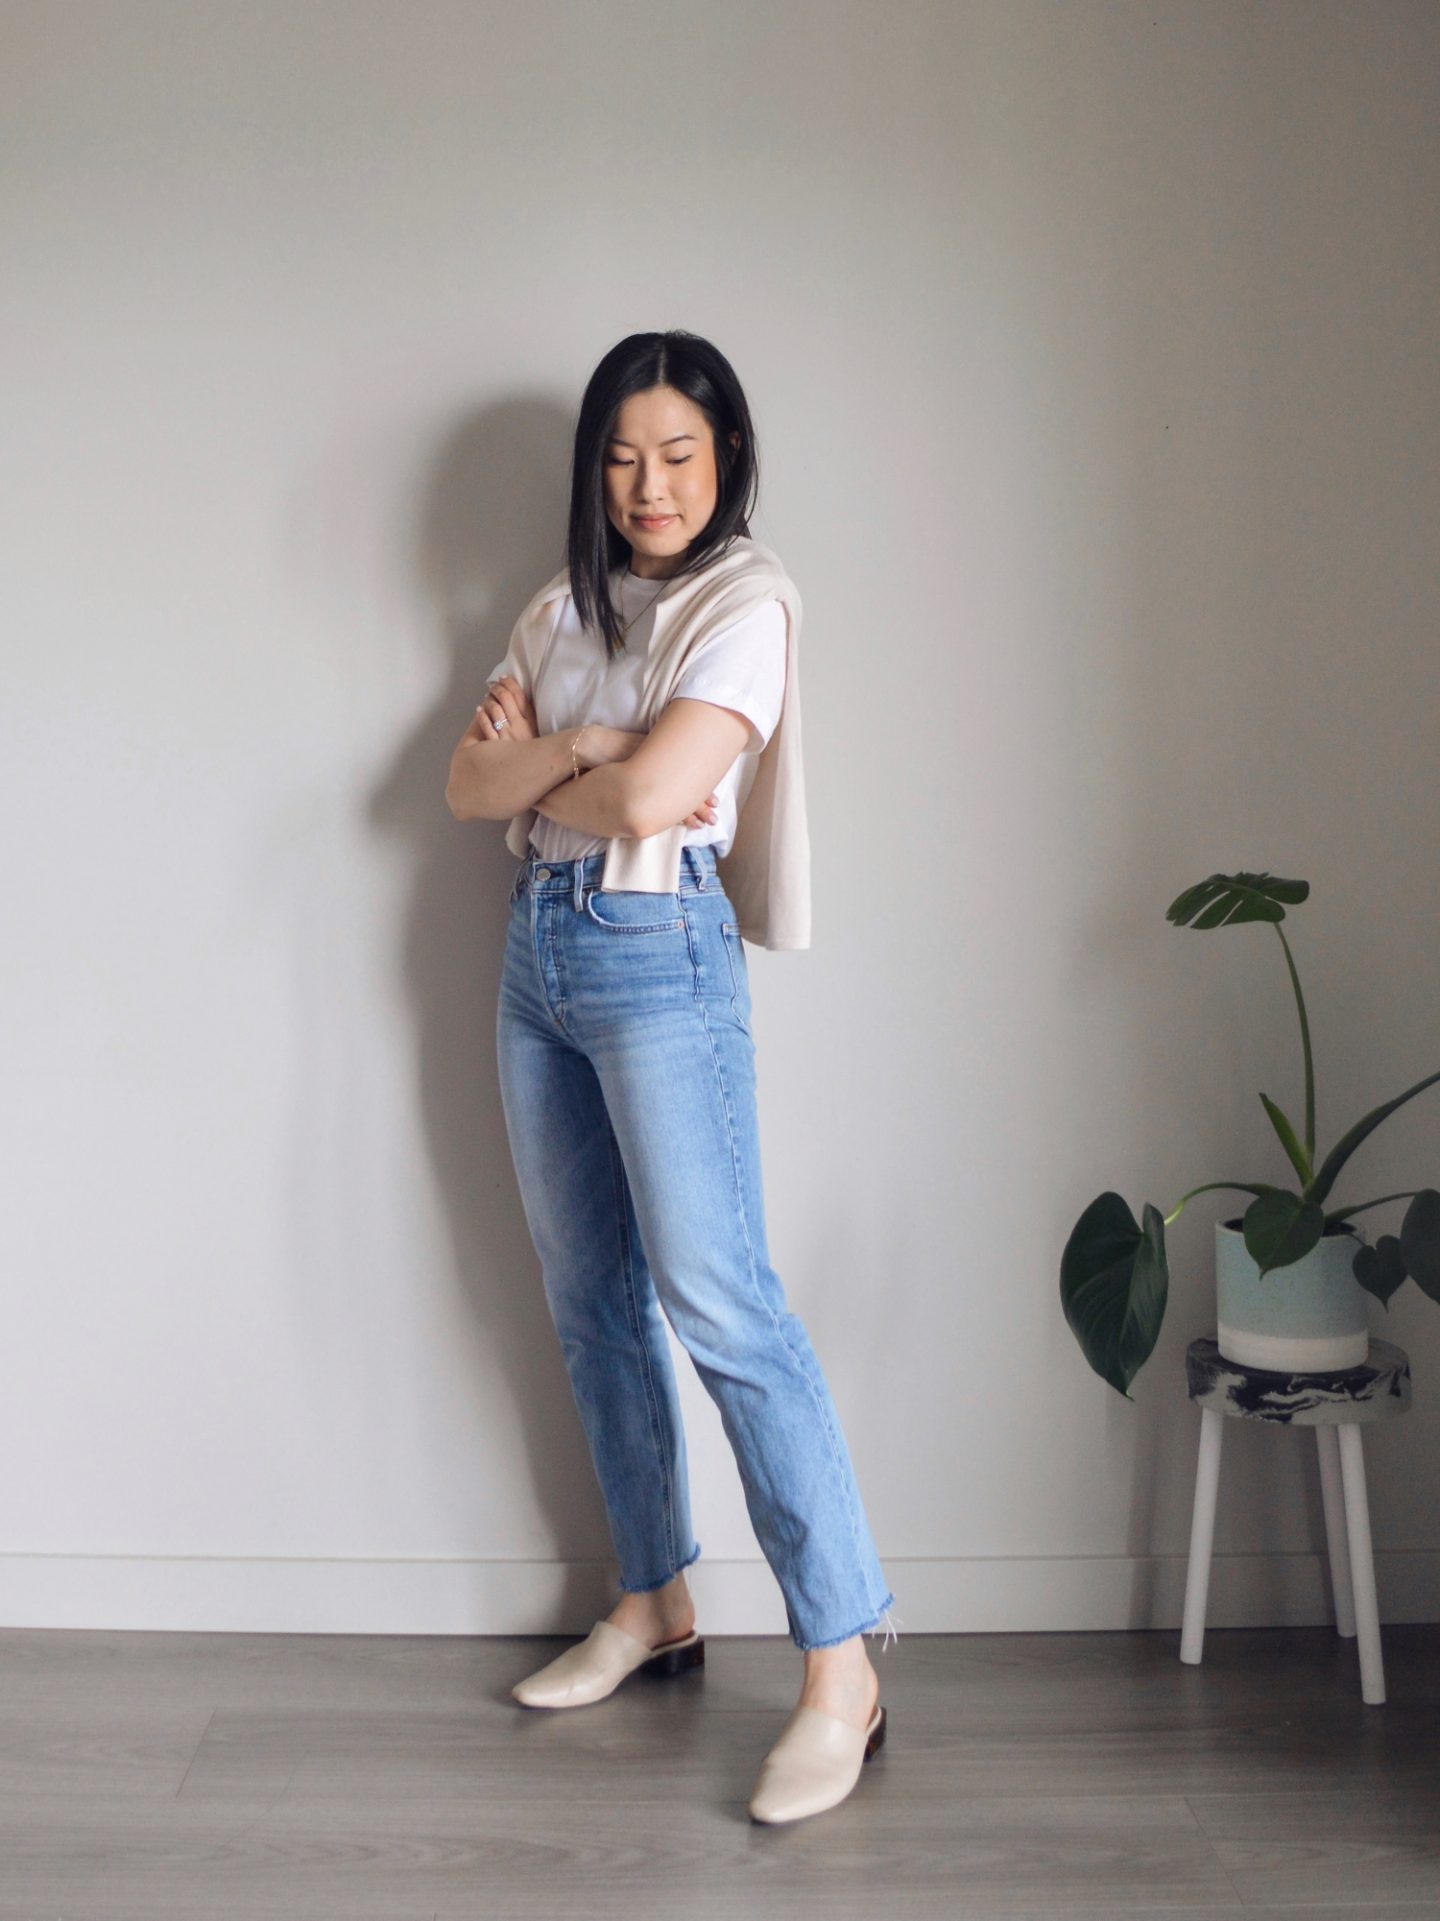 Outfit details: white t-shirt, merino wool sweater over shoulders, blue straight leg jeans, cream mules